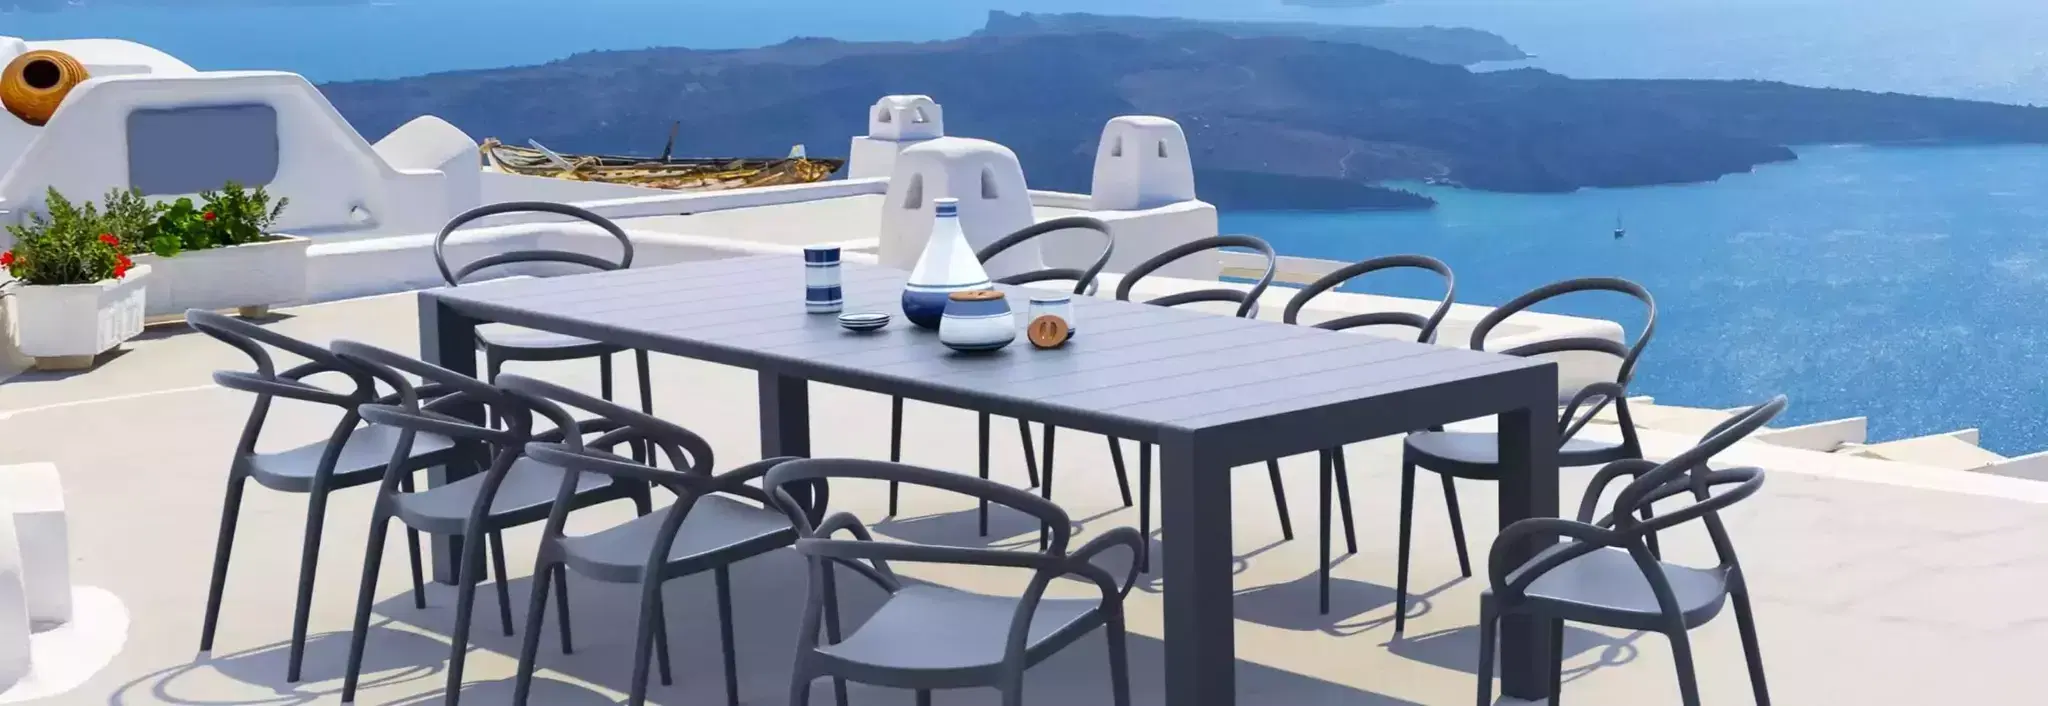 How to choose the best outdoor dining furniture